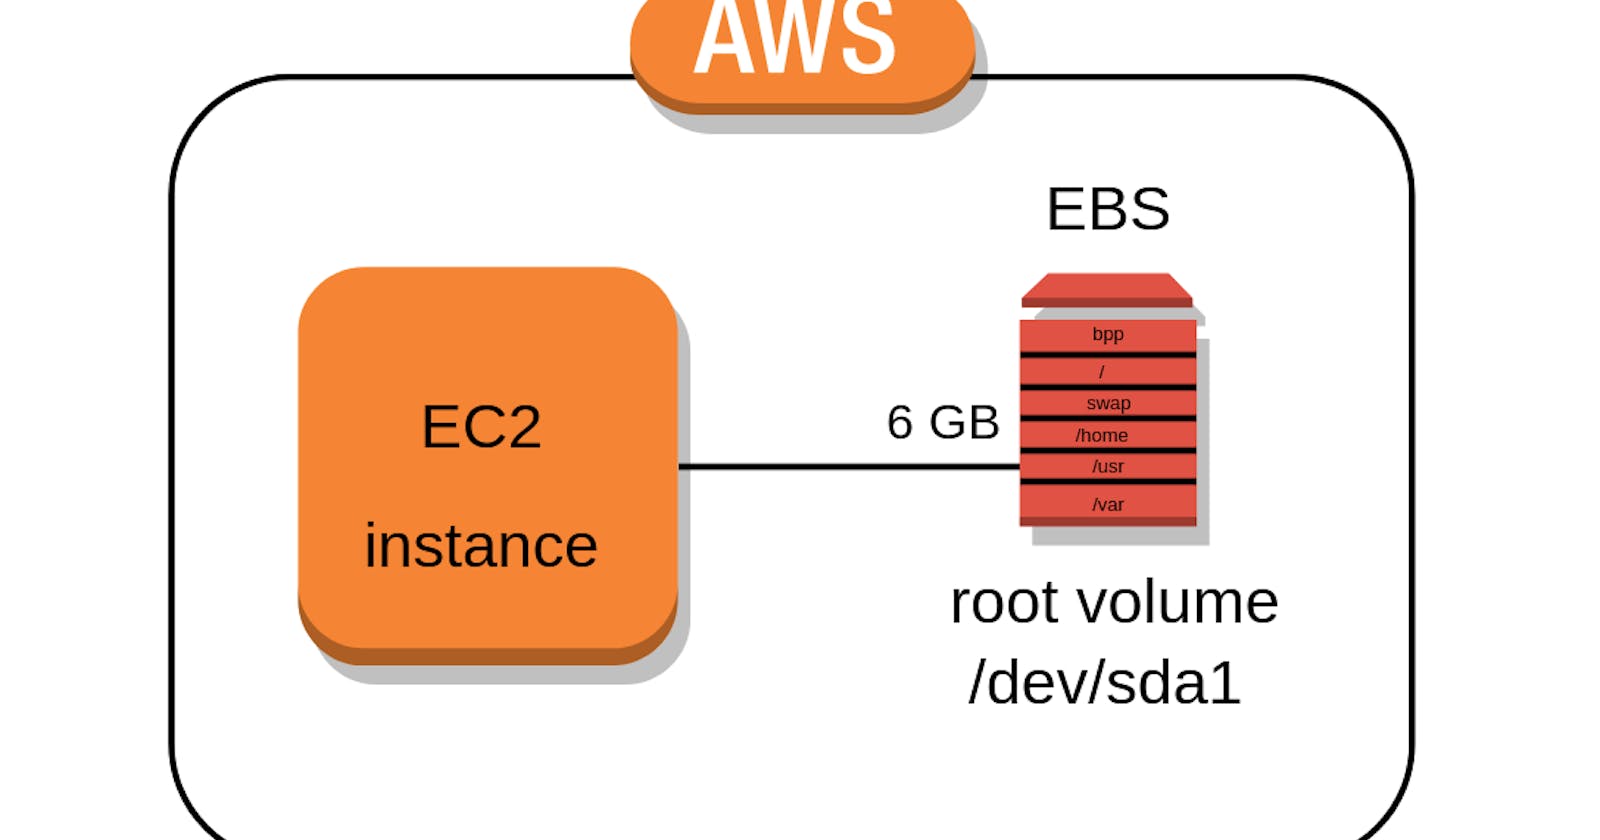 How to Attach EBS to EC2 instance?